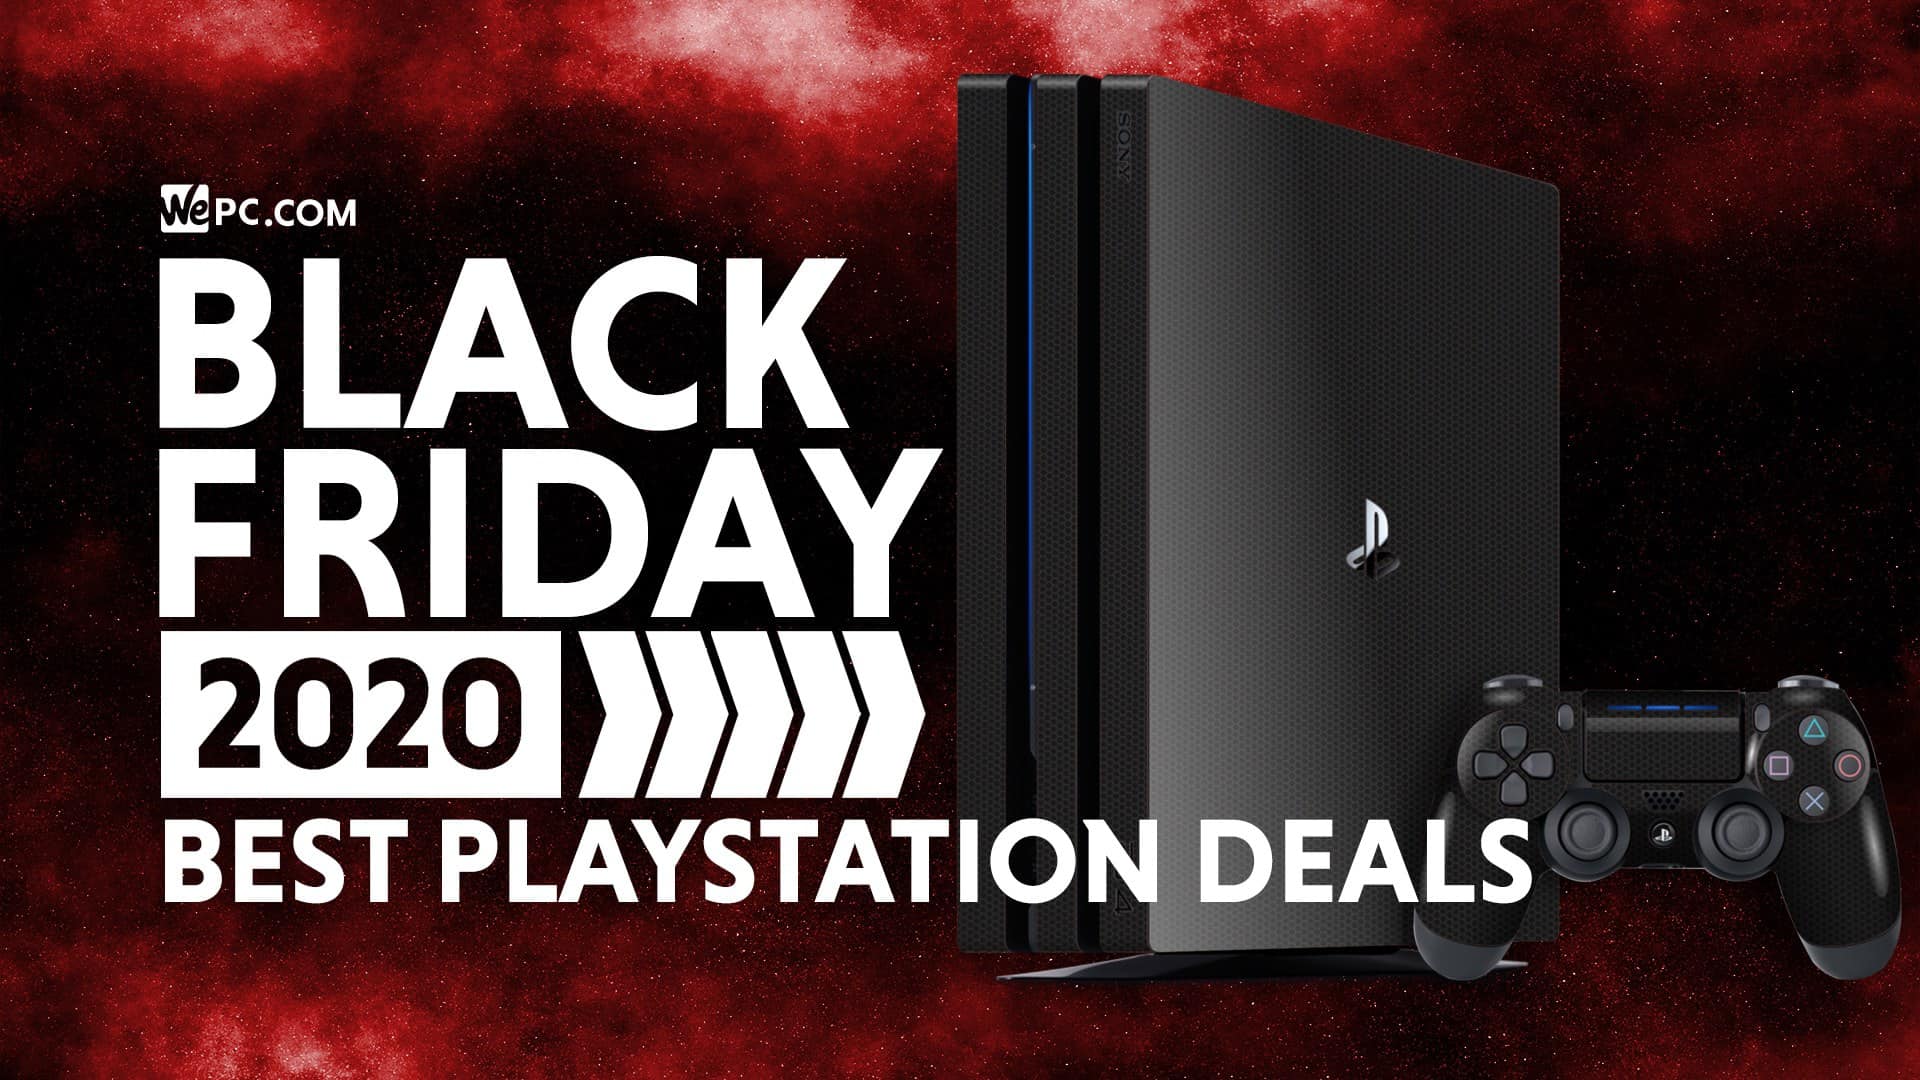 Playstation Black Friday Deals 2020 | WePC - Who Has Black Friday Deals On Playstations